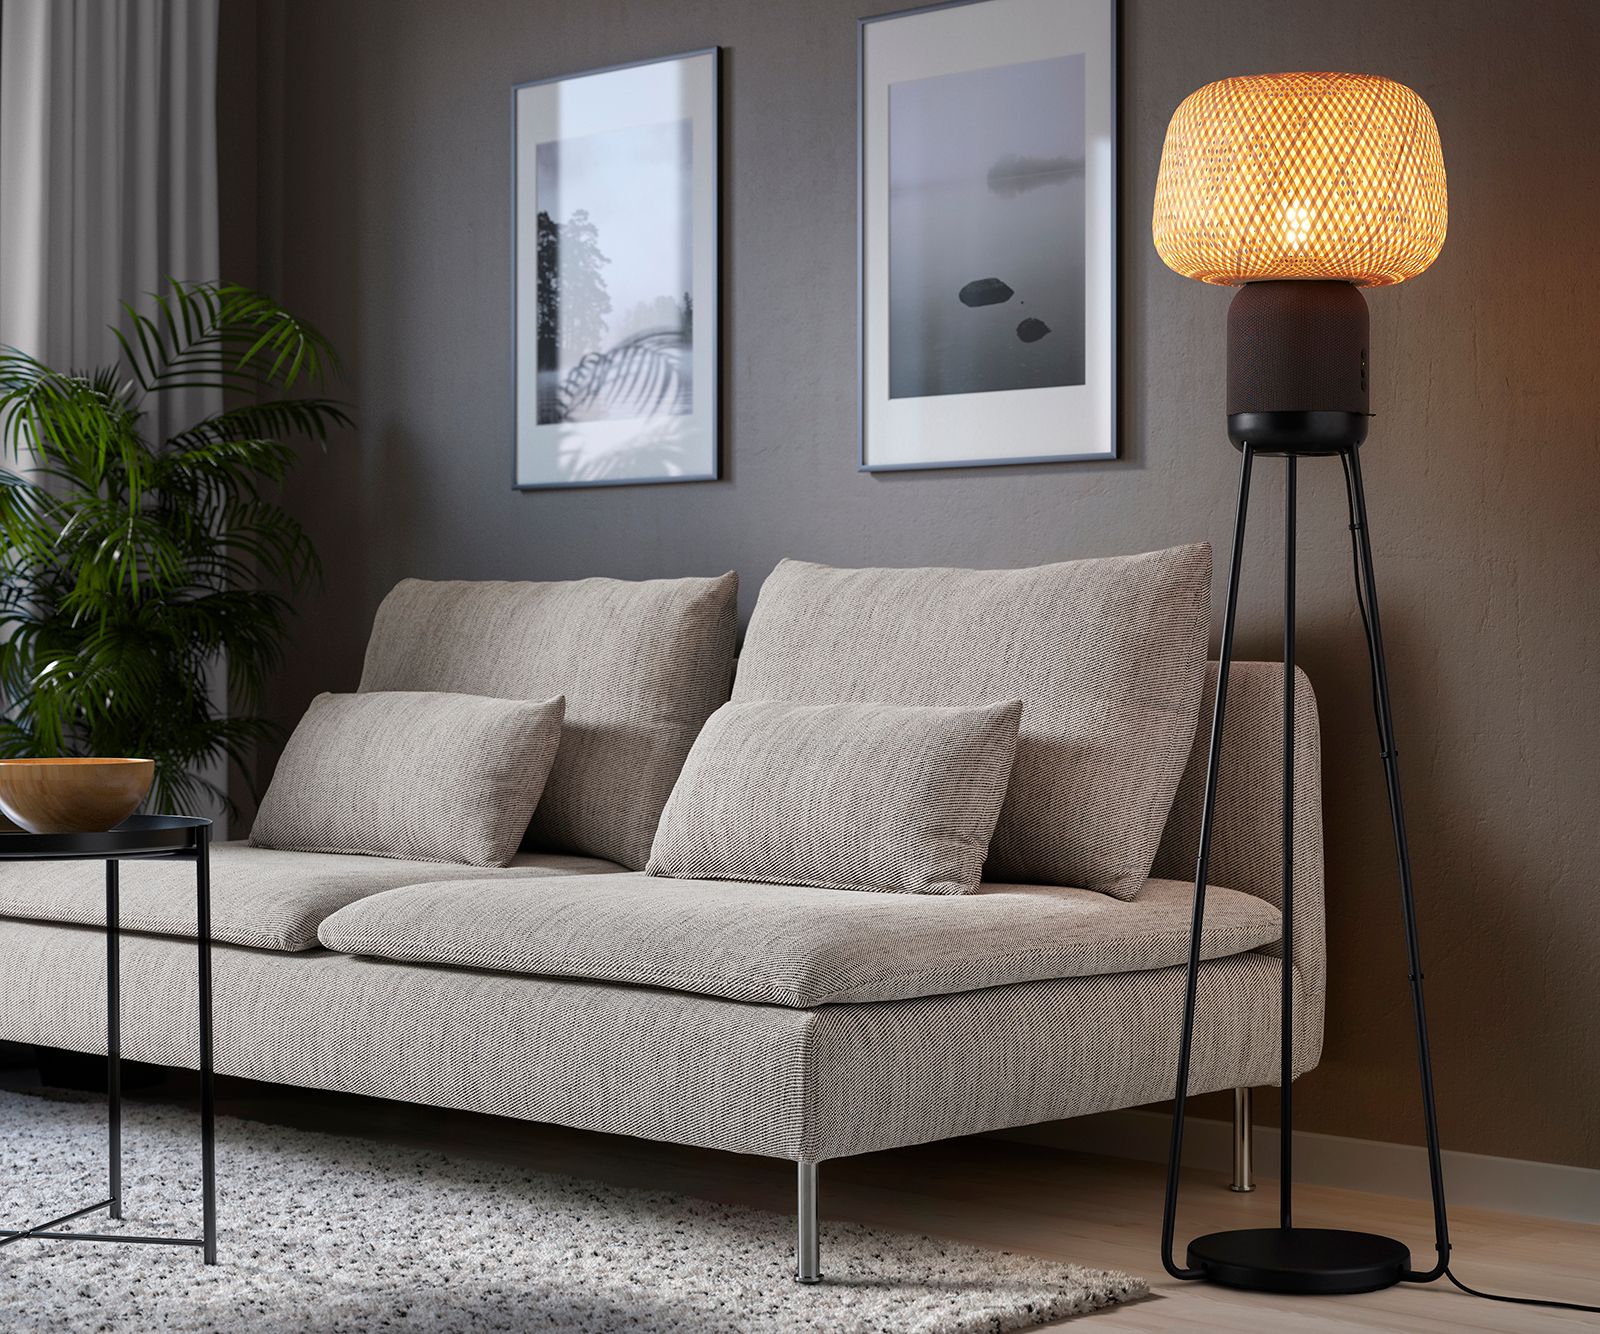 Sonos and Ikea's latest collab is a new Symfonisk floor lamp speaker photo 3